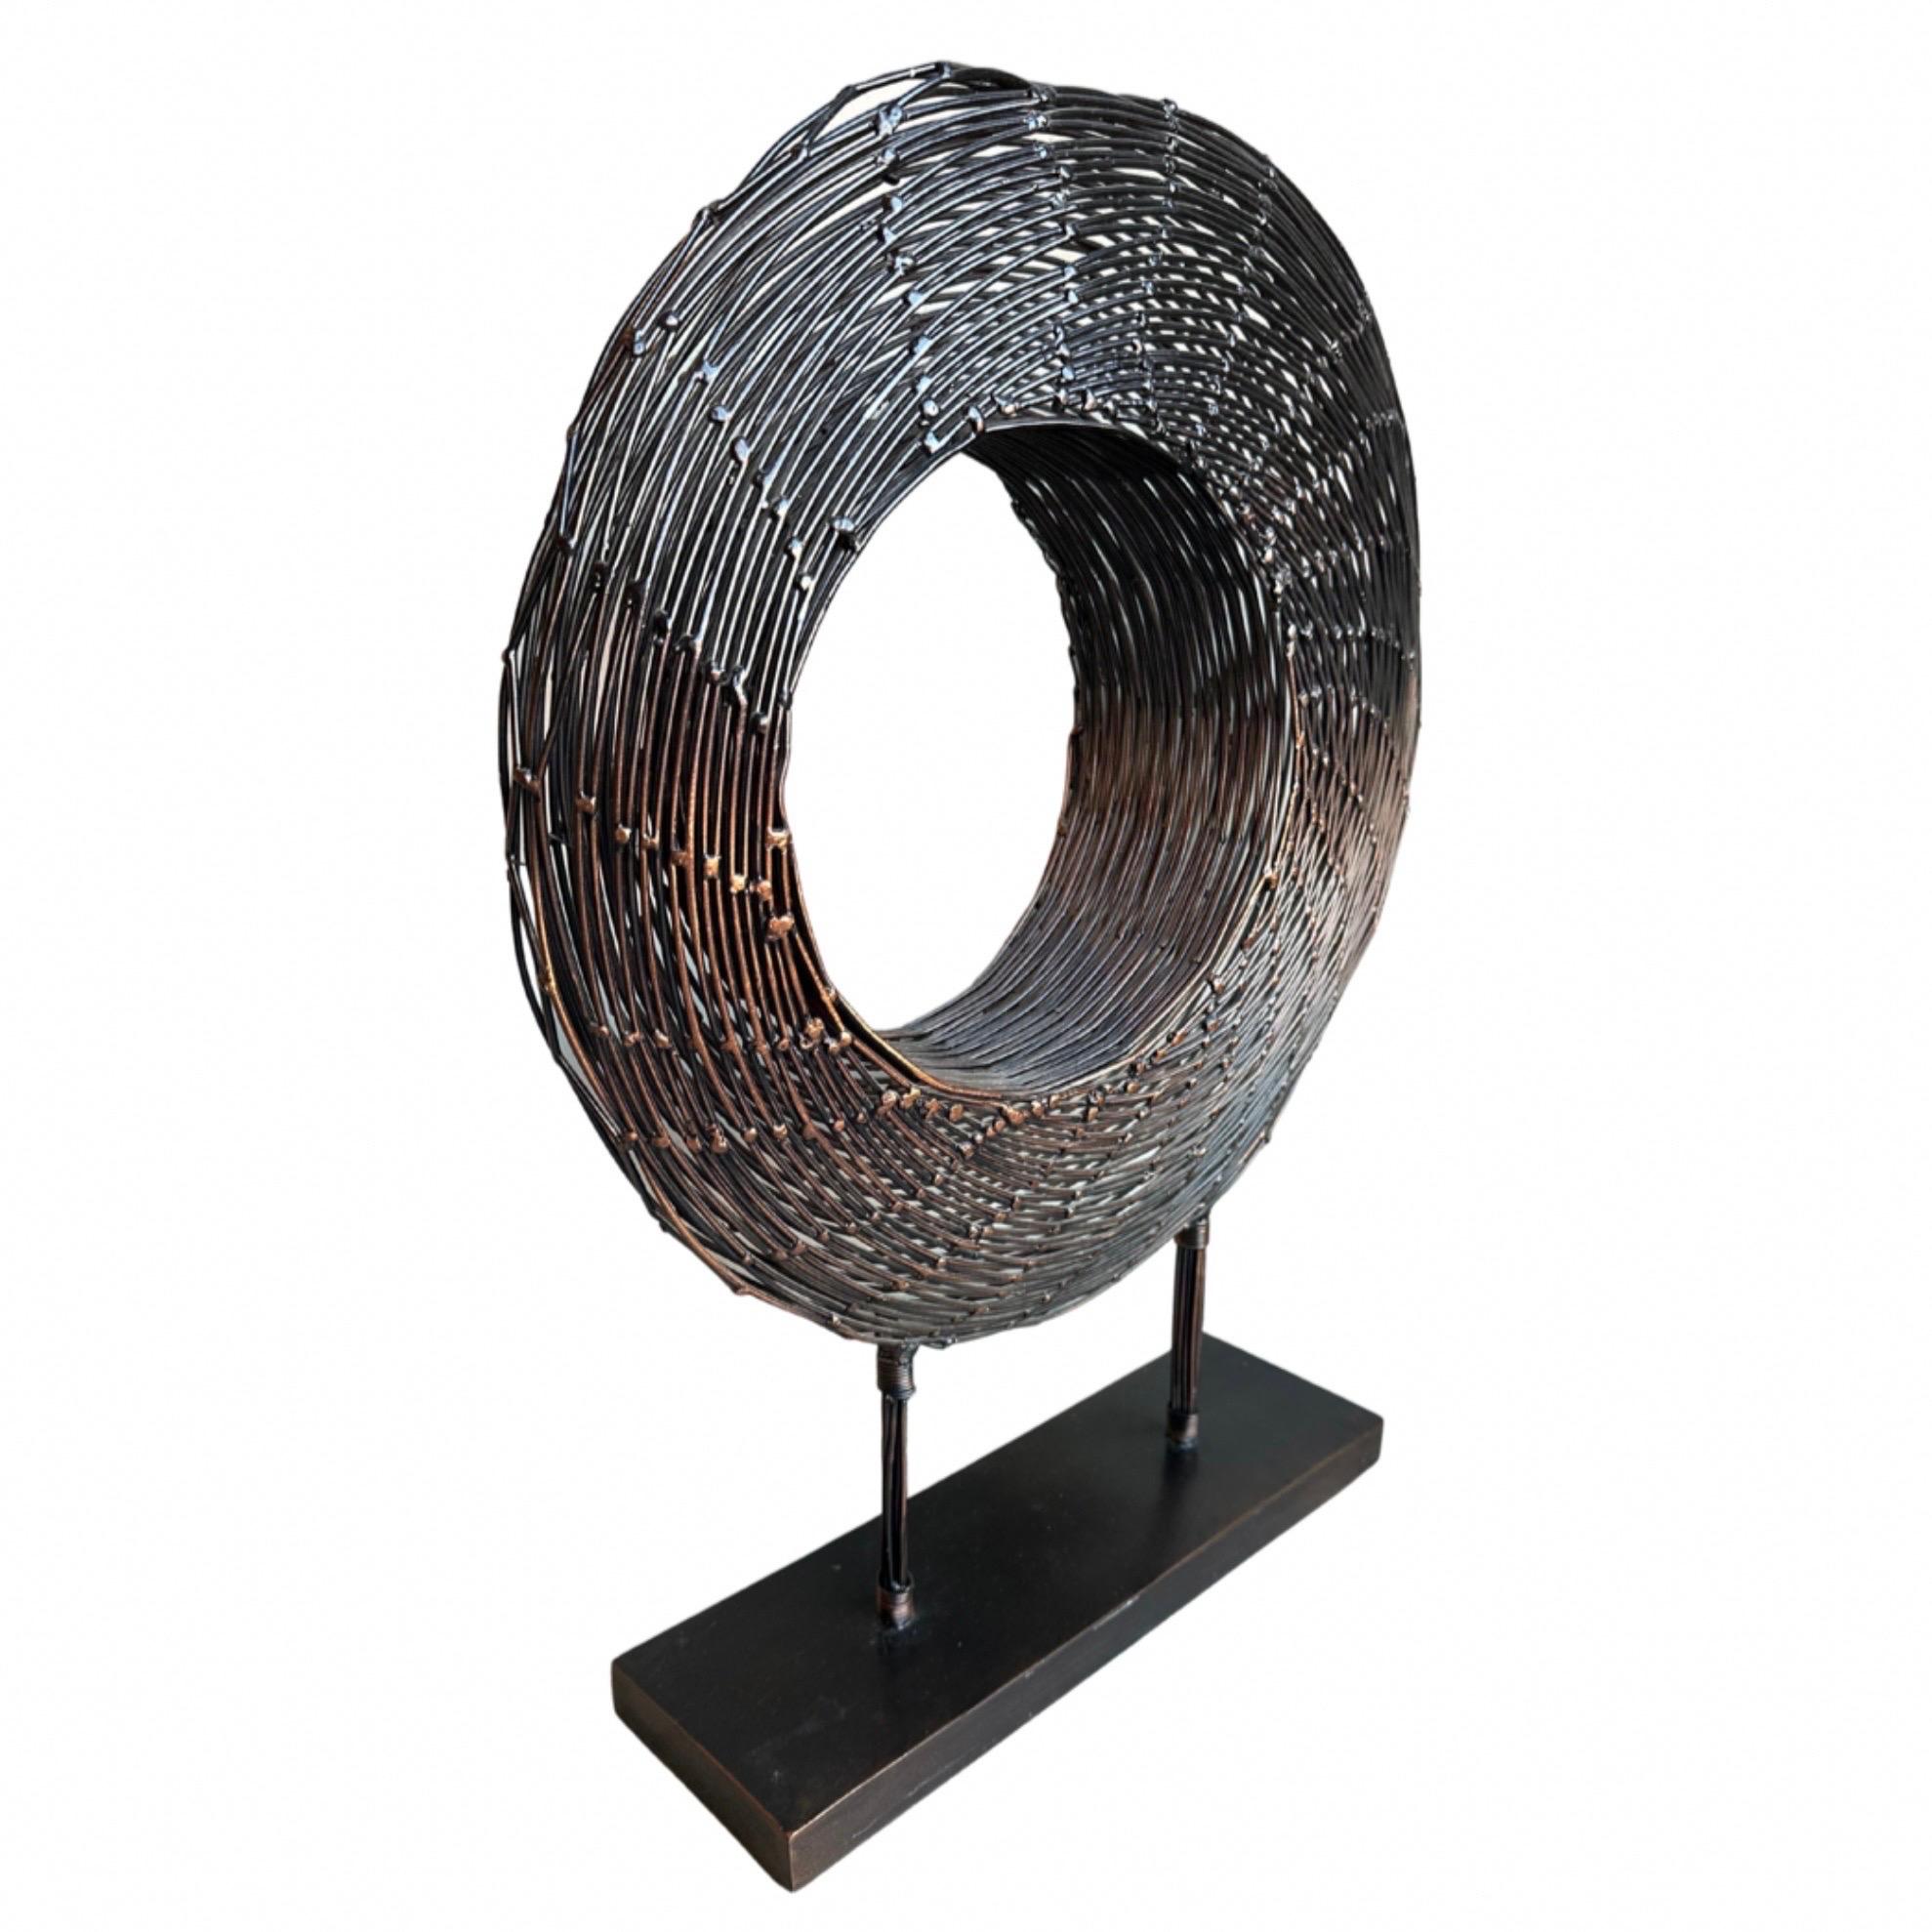 Blackened copper wire spiral sculpture on metal stand. 

 Measures: Height : 25 in

 Width : 20 in

 Base width : 16 in

 Base depth : 5 in

 Base height : 1 in.
 